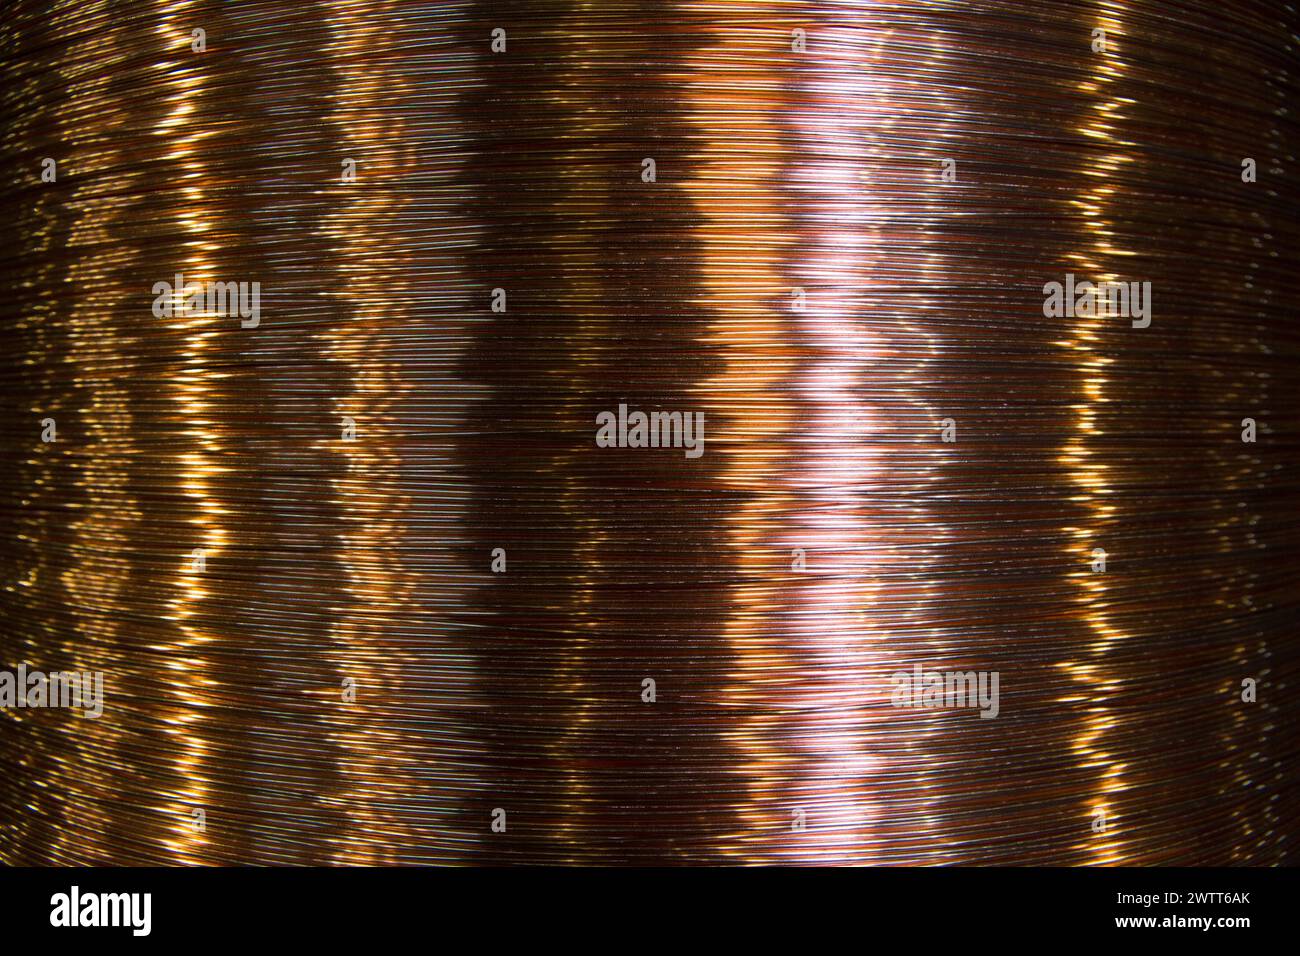 Large reels of copper wire at an industrial manufacturing plant. Stock Photo